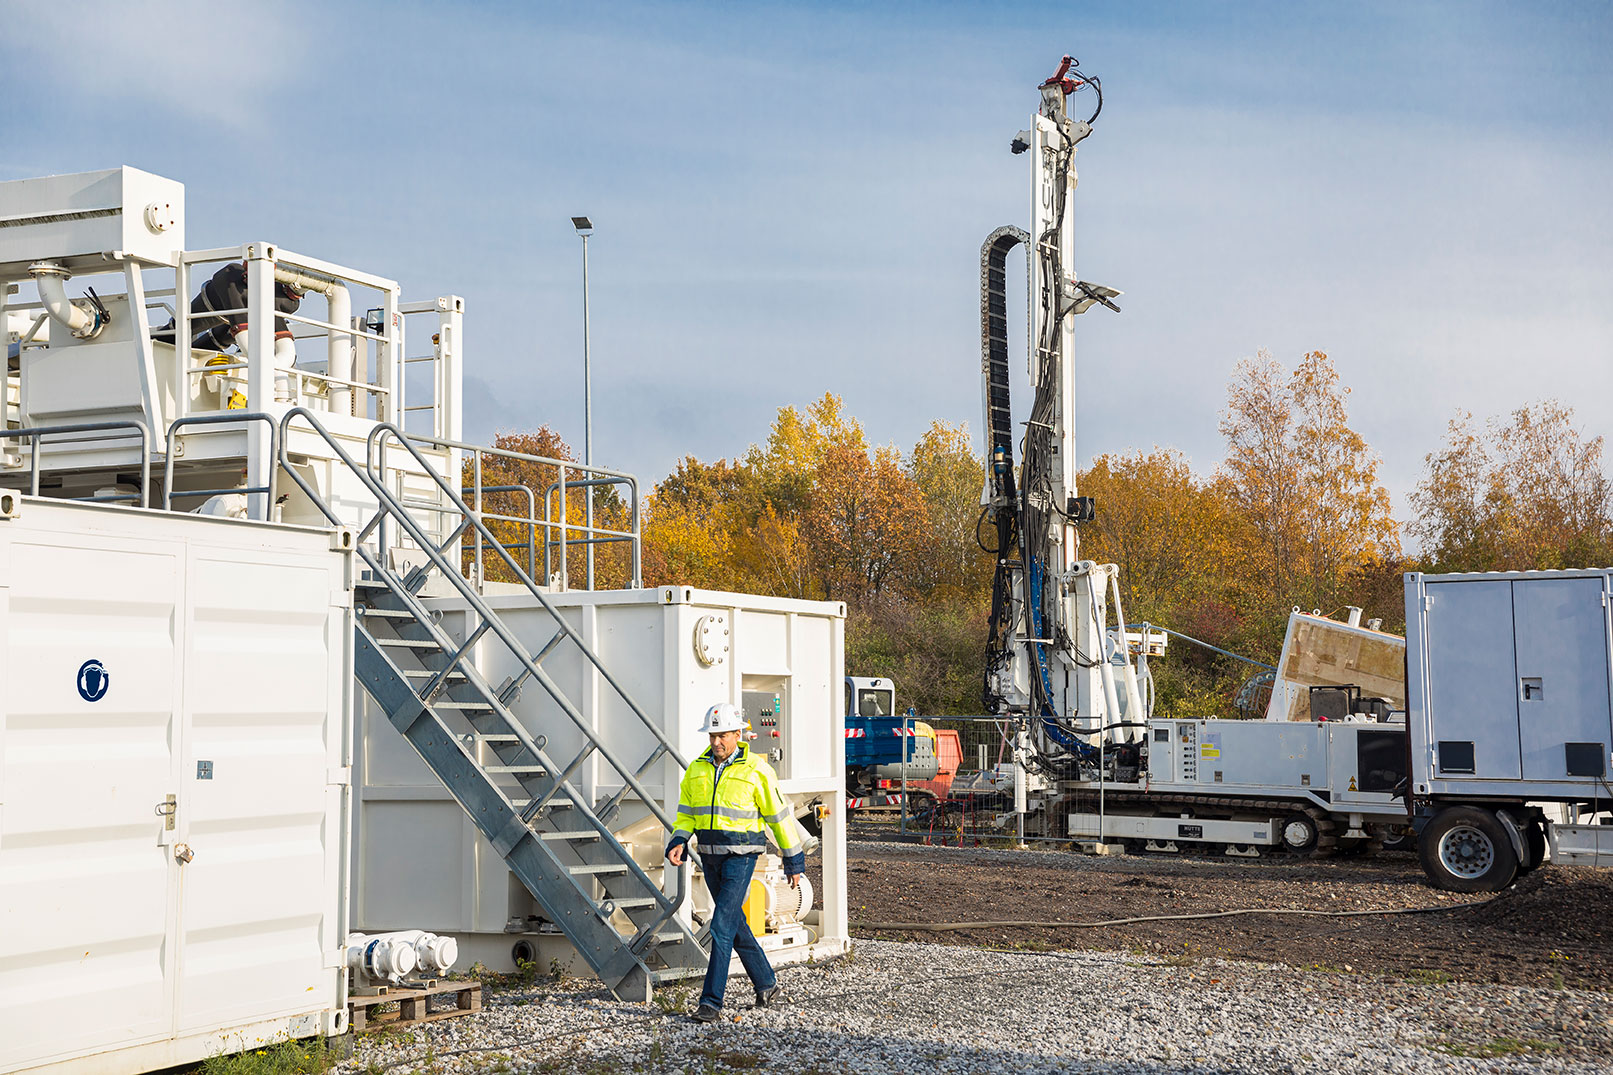 mobile drilling system at Fraunhofer IEG for the development of drilling tools